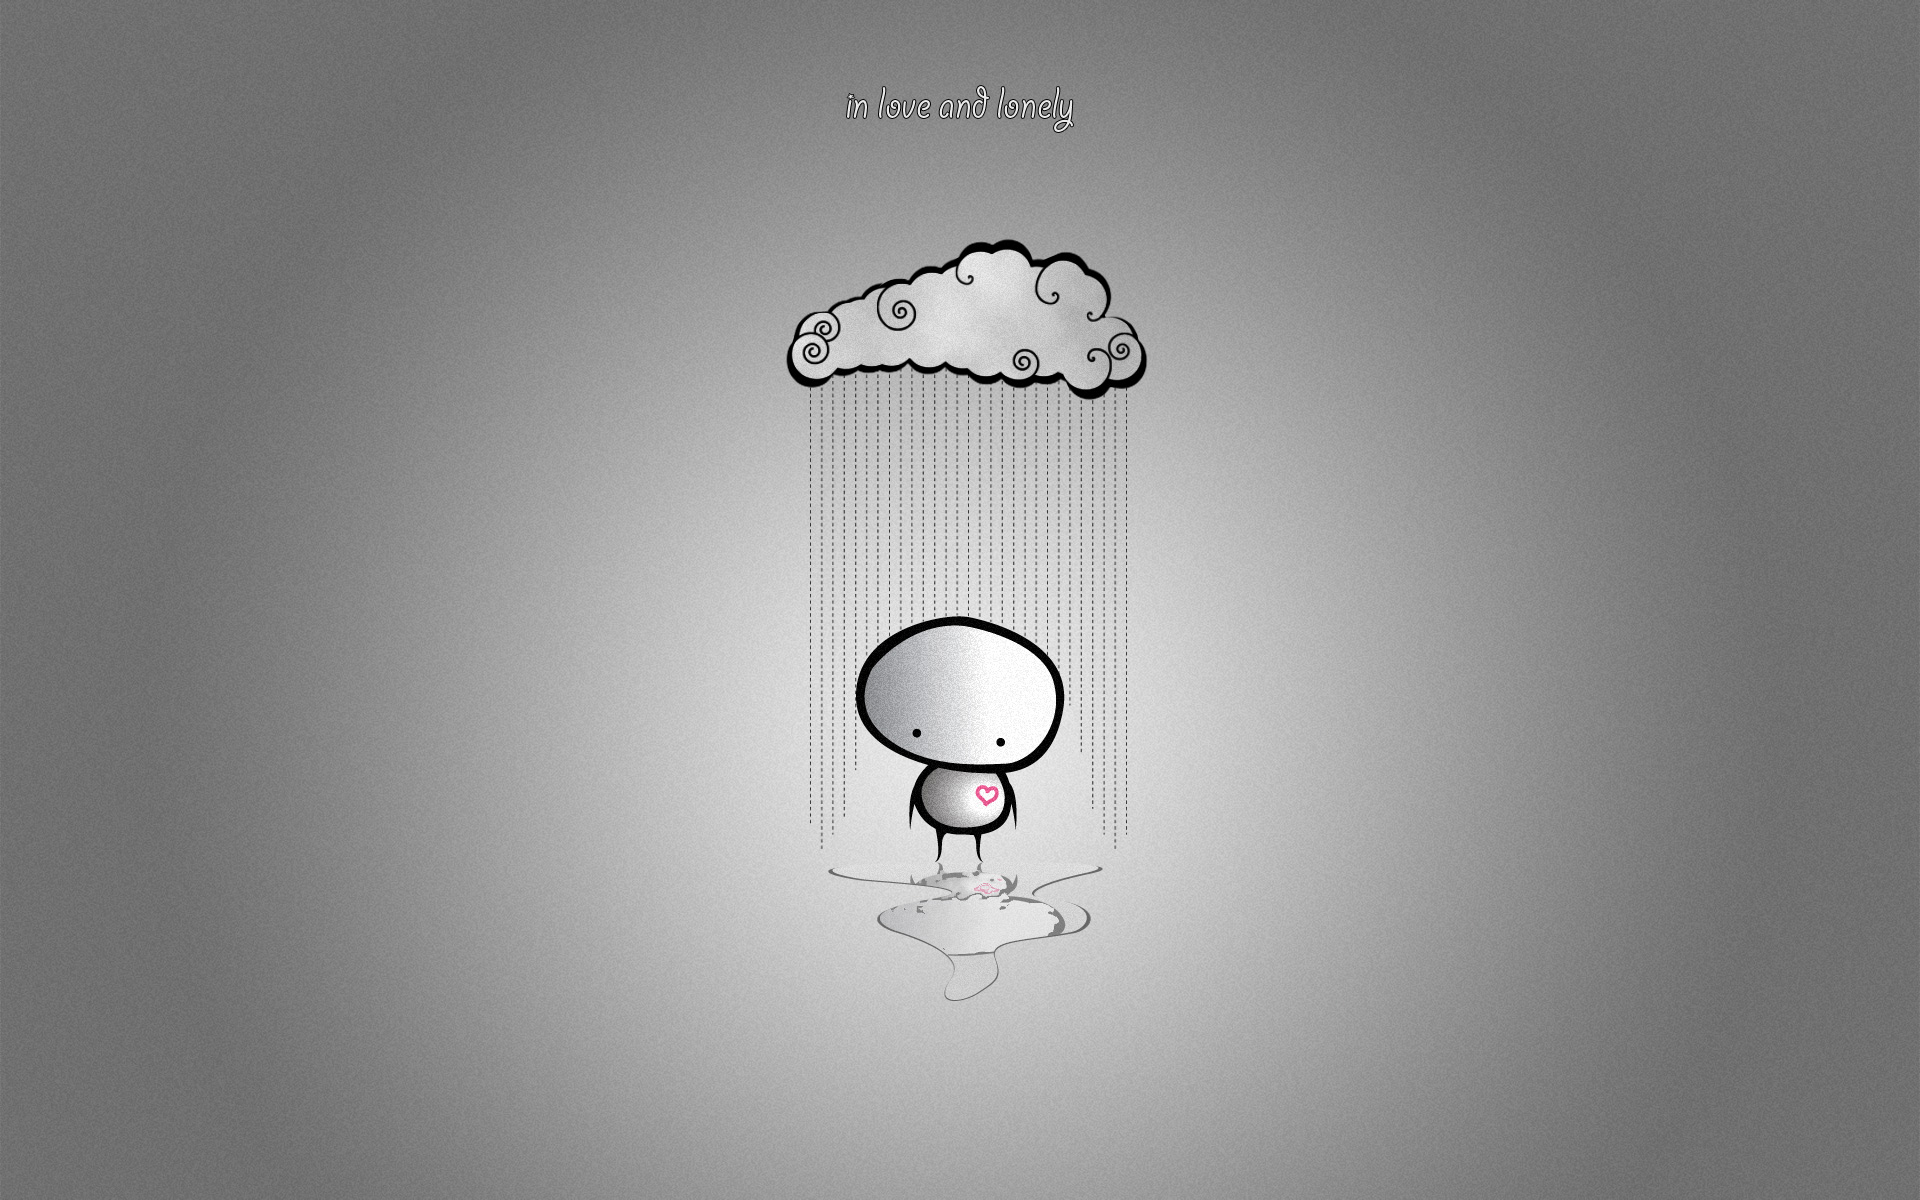 1081164 download free Gray wallpapers for computer, artistic, sad, minimalist, cloud Gray pictures and backgrounds for desktop